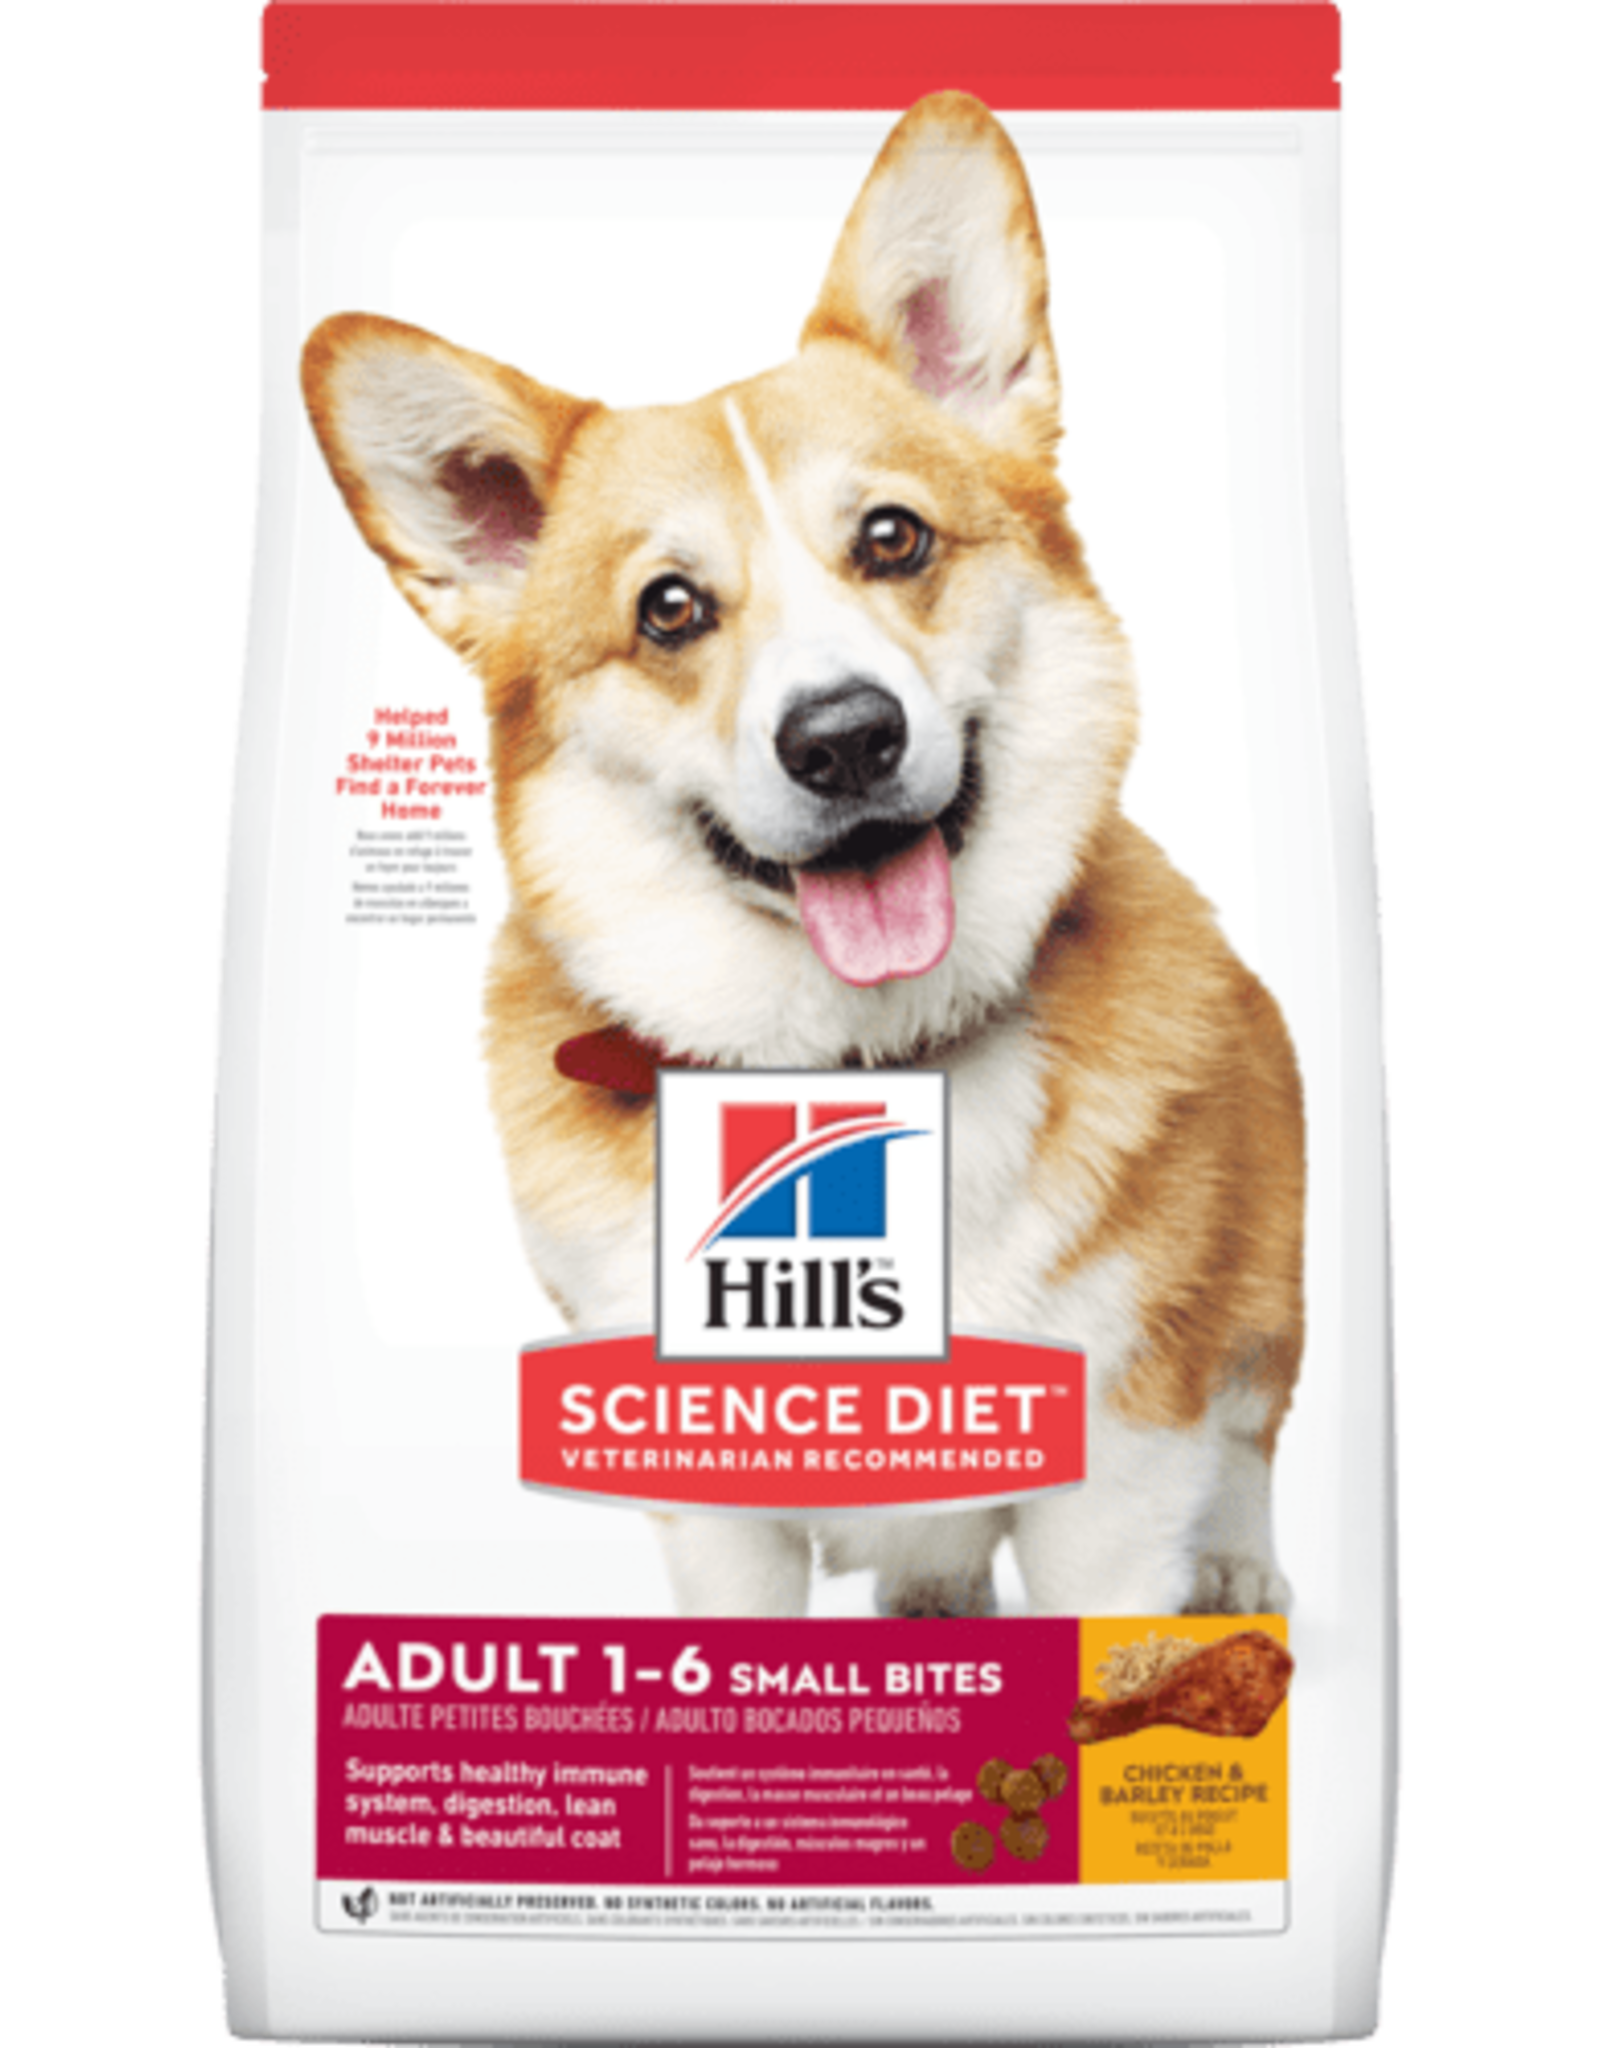 SCIENCE DIET HILL'S SCIENCE DIET CANINE ADULT SMALL BITES 5LBS